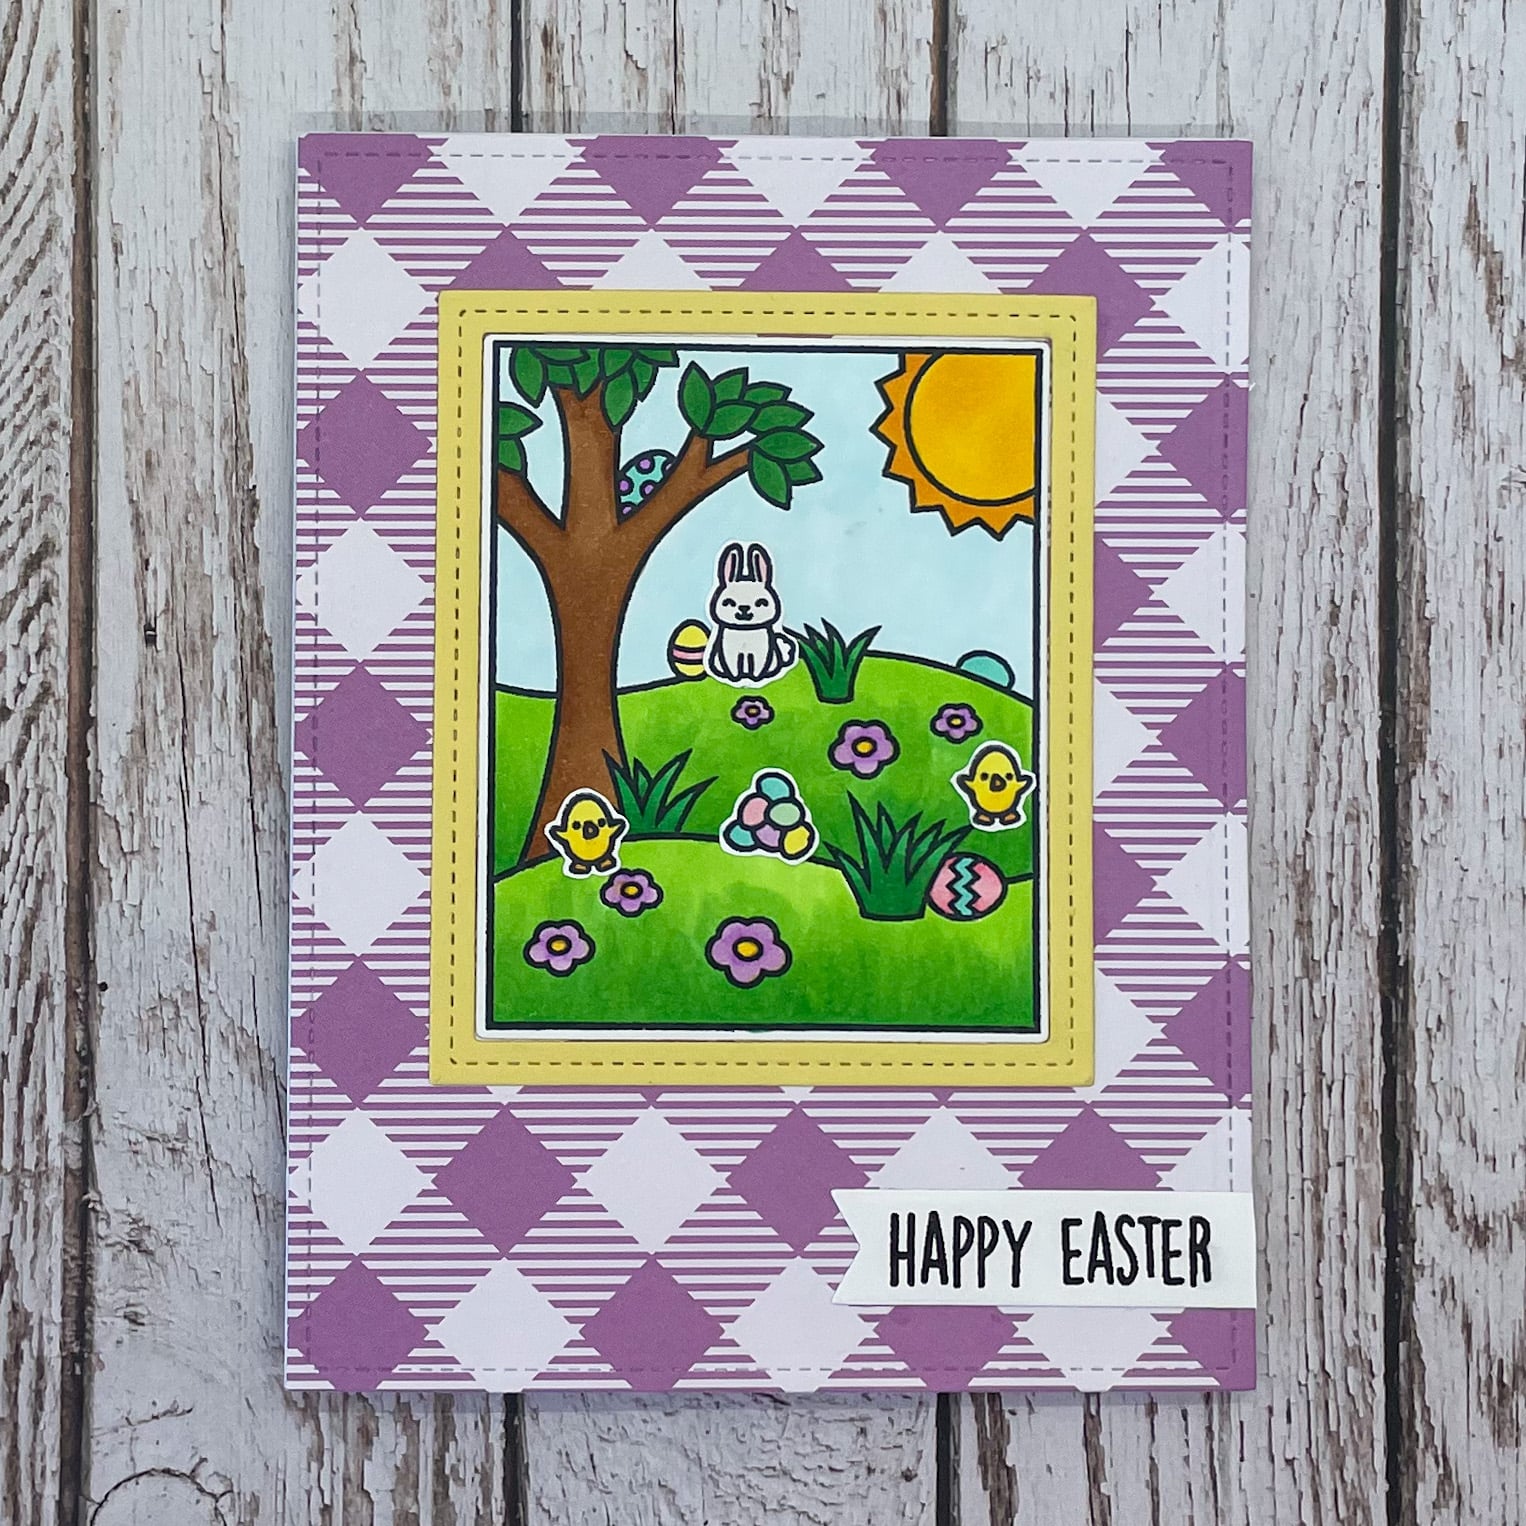 Colourful Picture Scene Handmade Easter Card